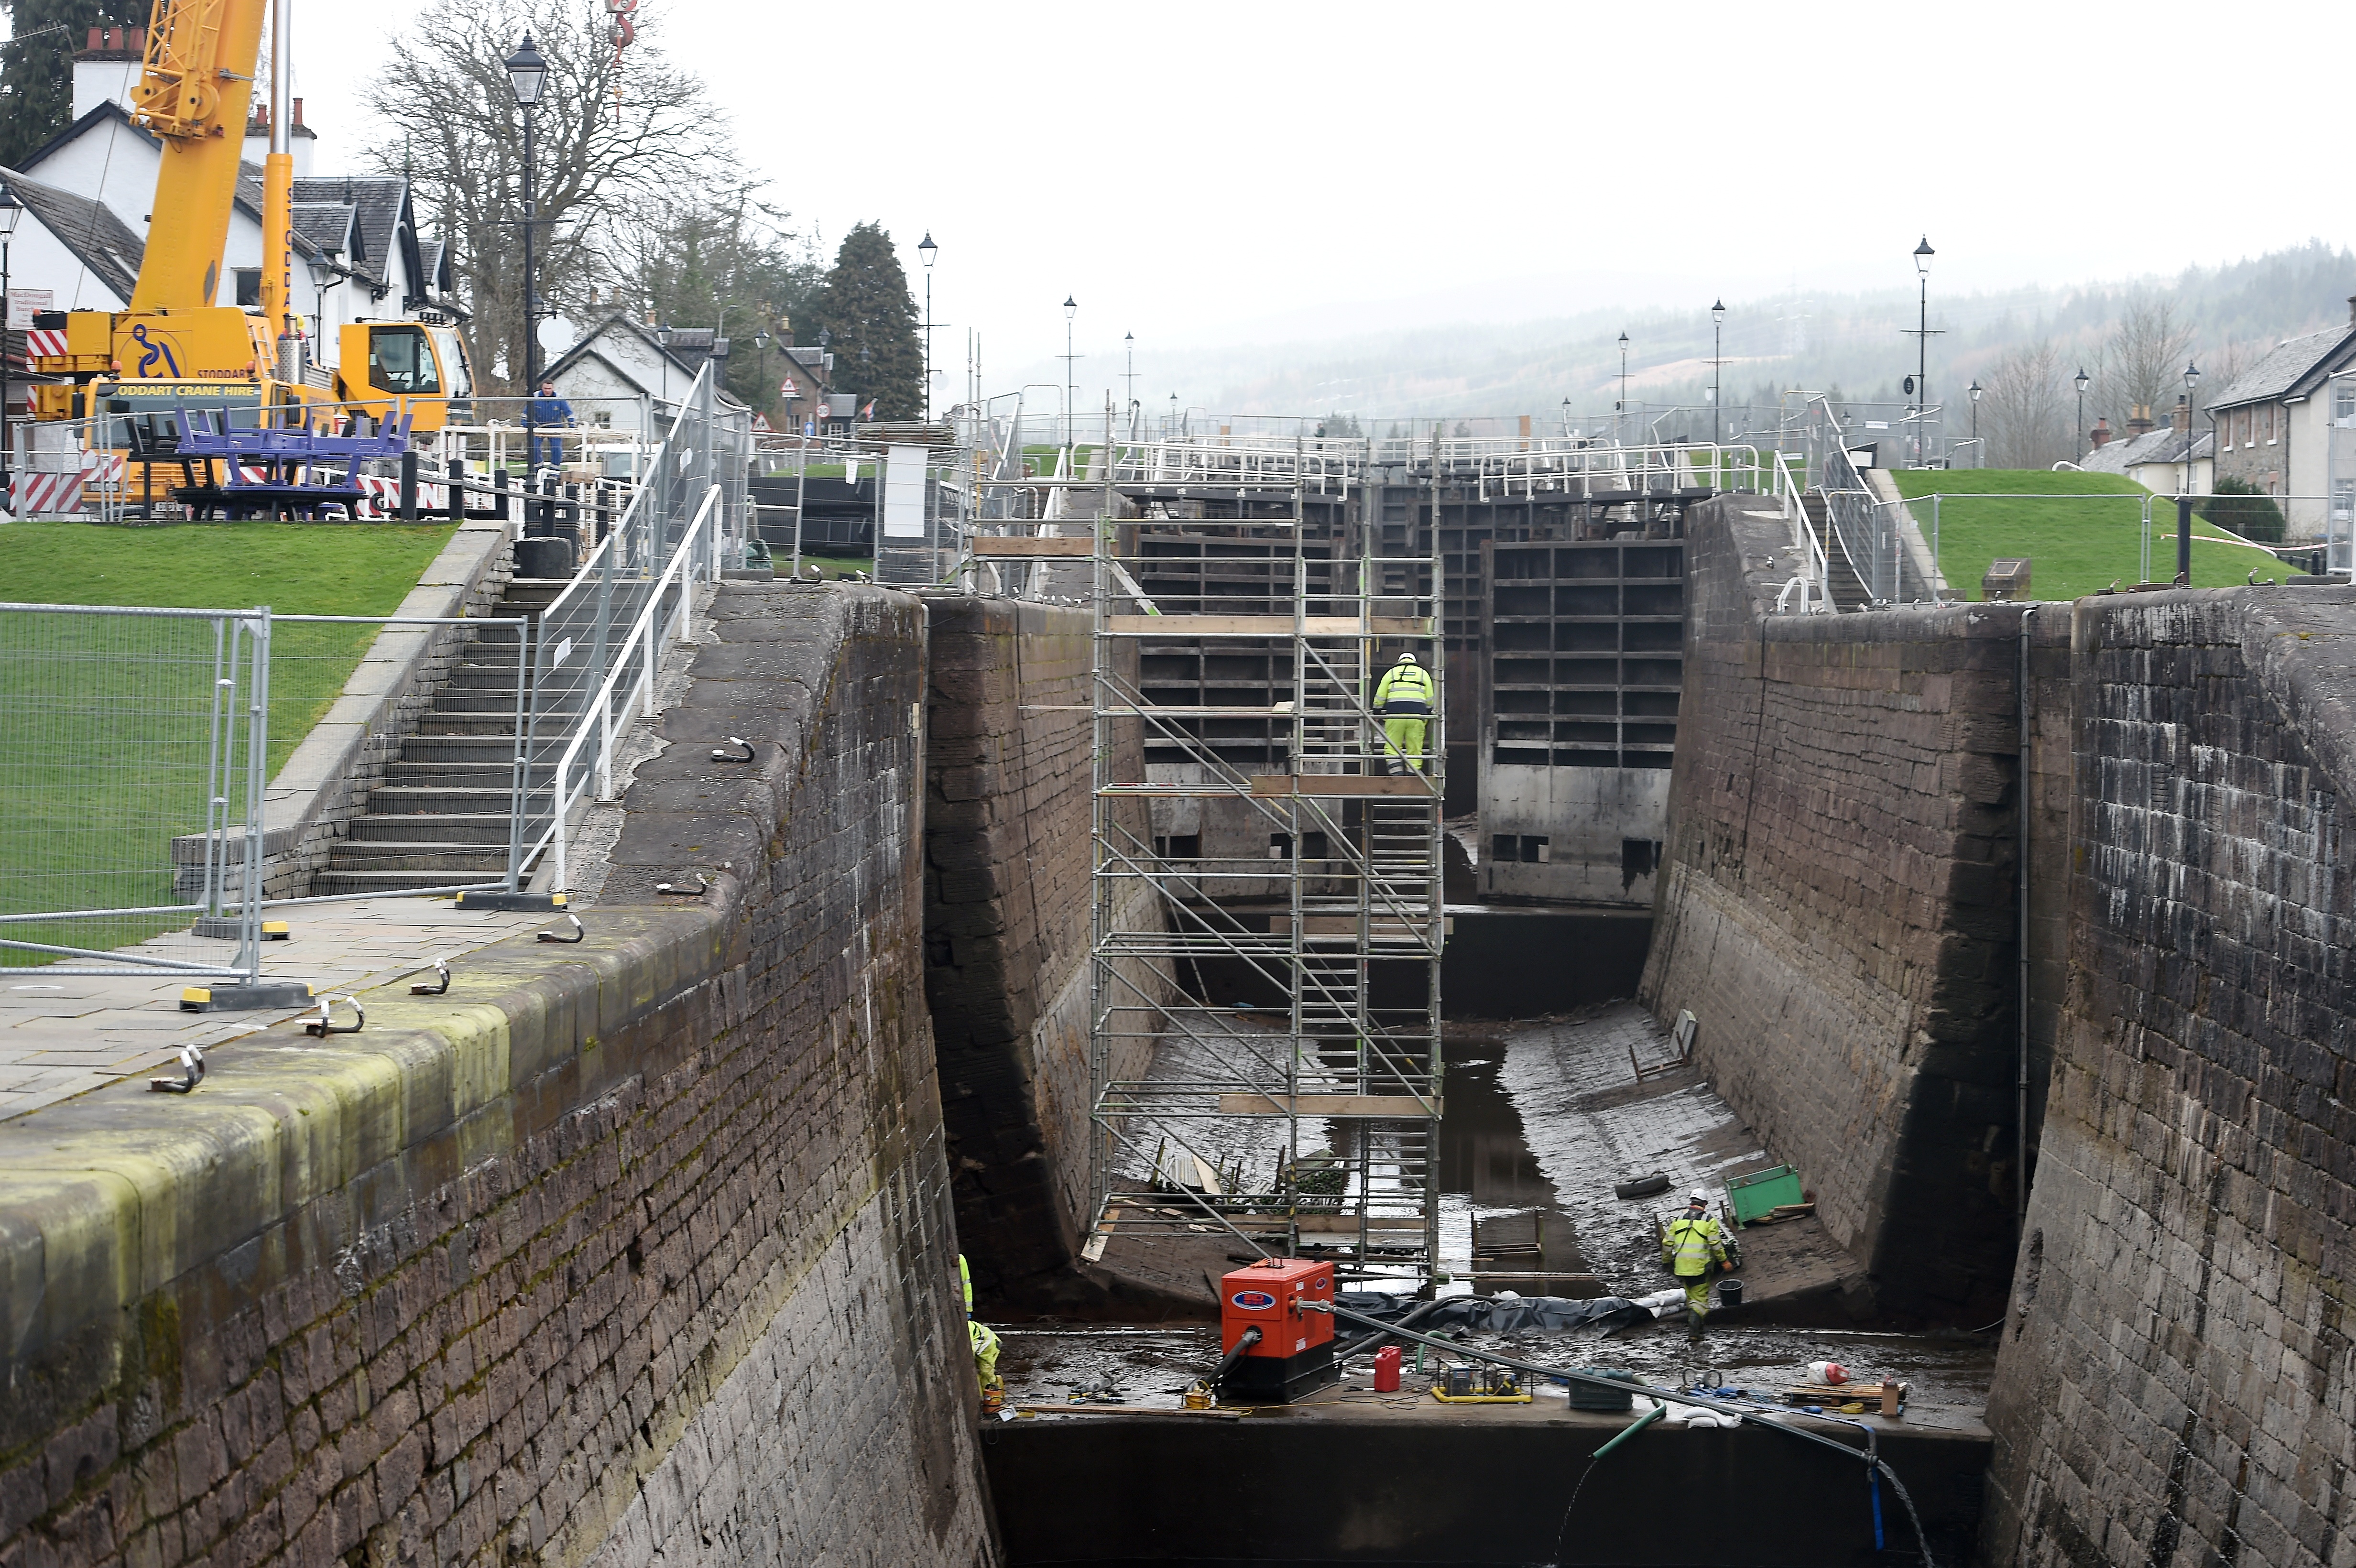 Engineers at work on the Caledonian Canal